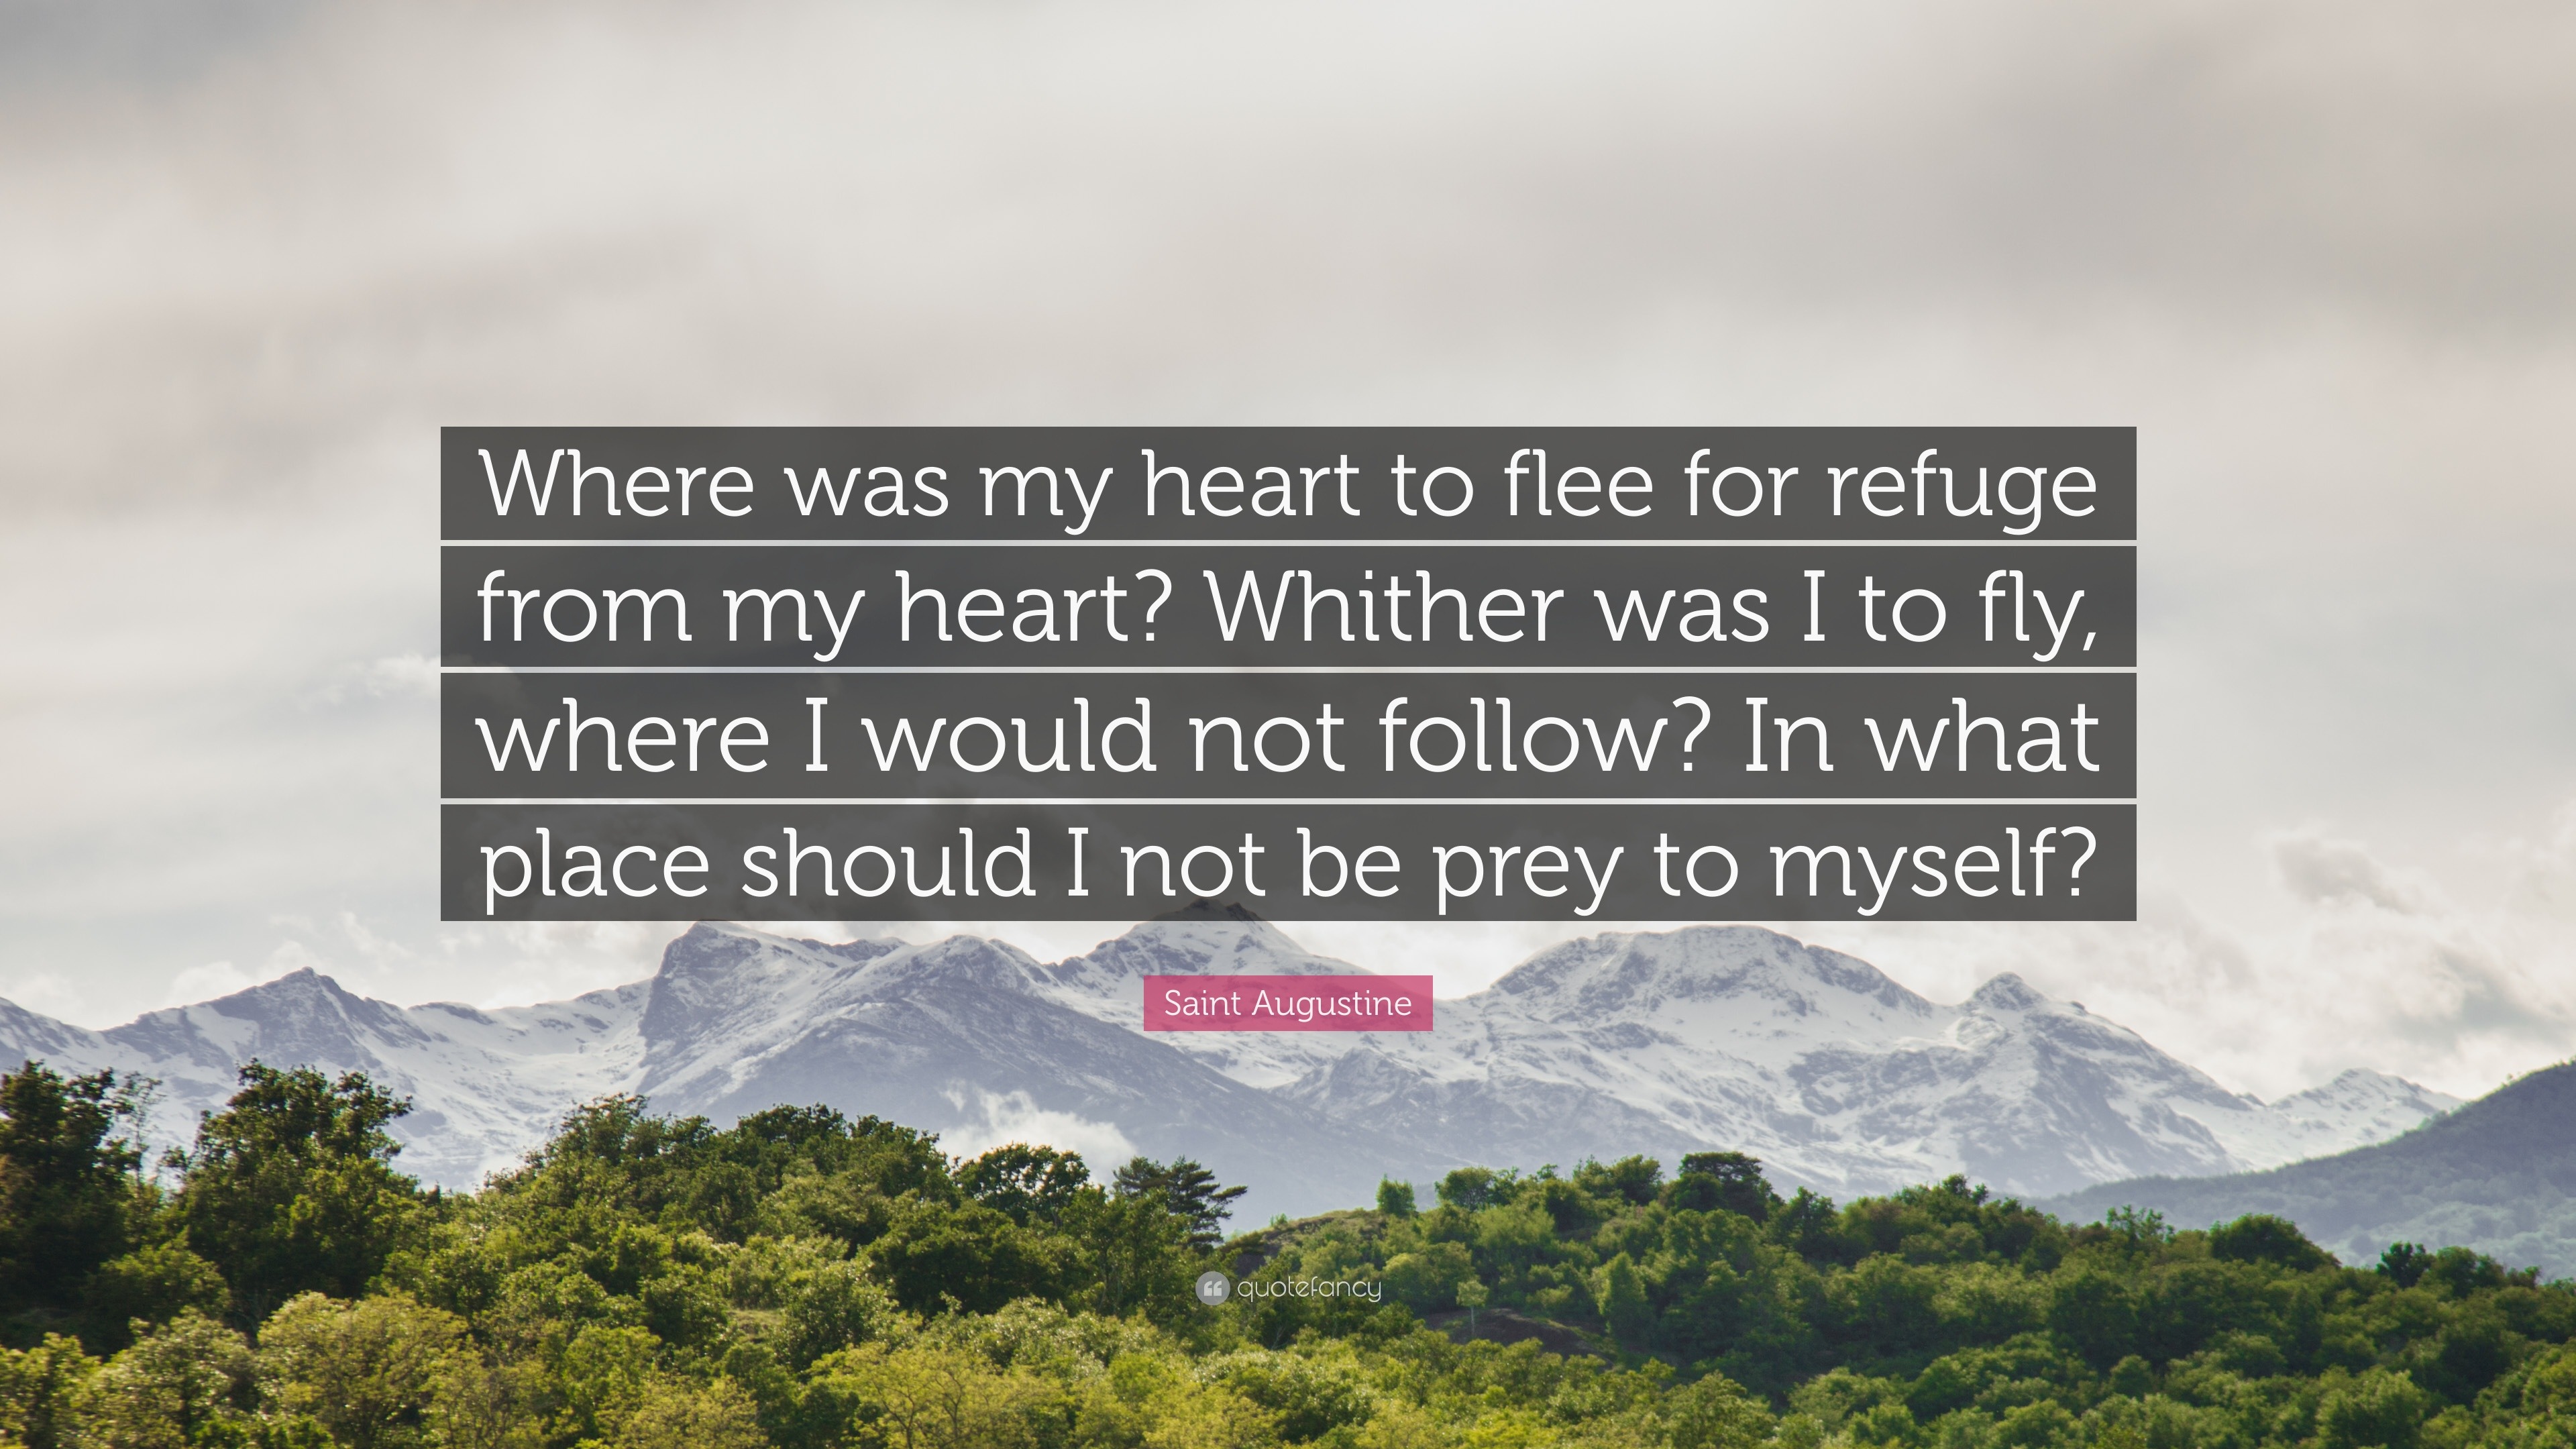 Saint Augustine Quote: “Where was my heart to flee for ...